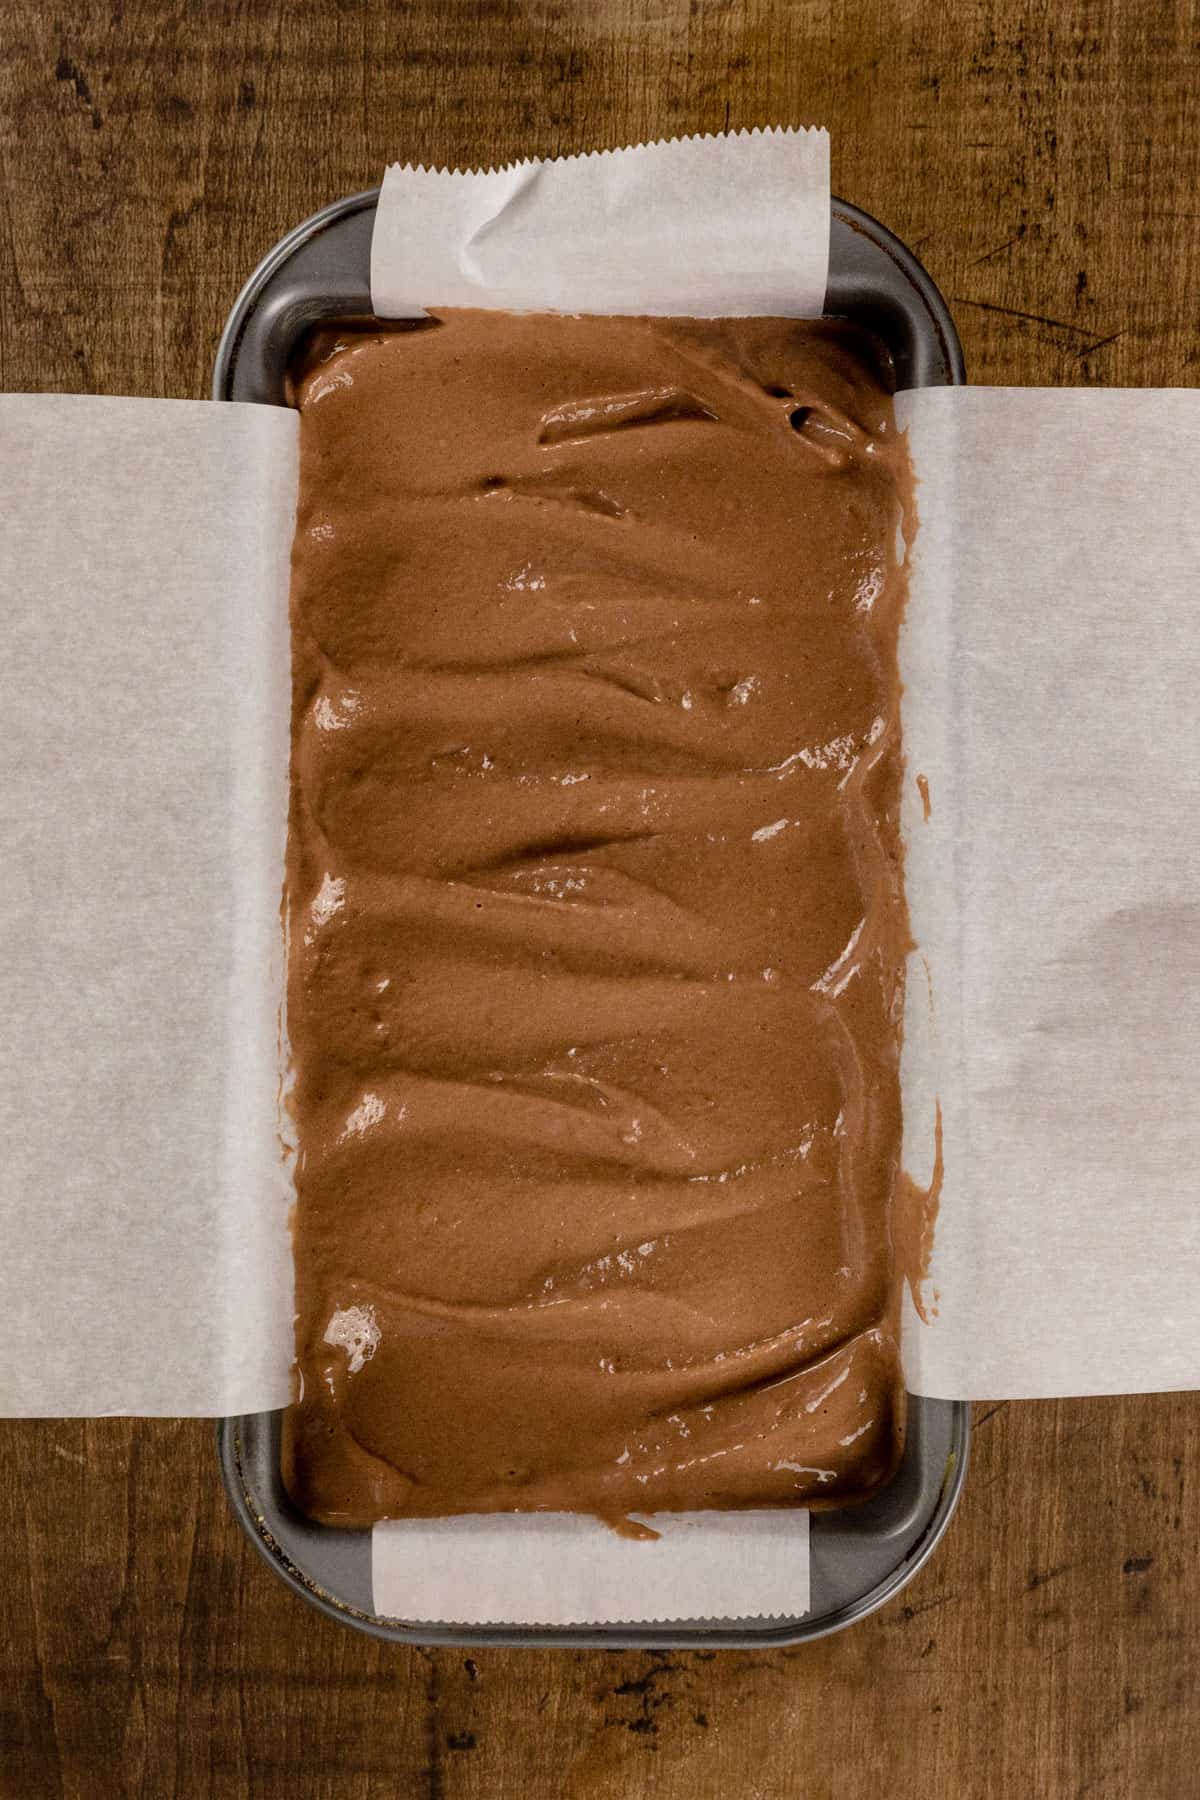 Chocolate nice cream in a loaf pan lined with parchment paper.